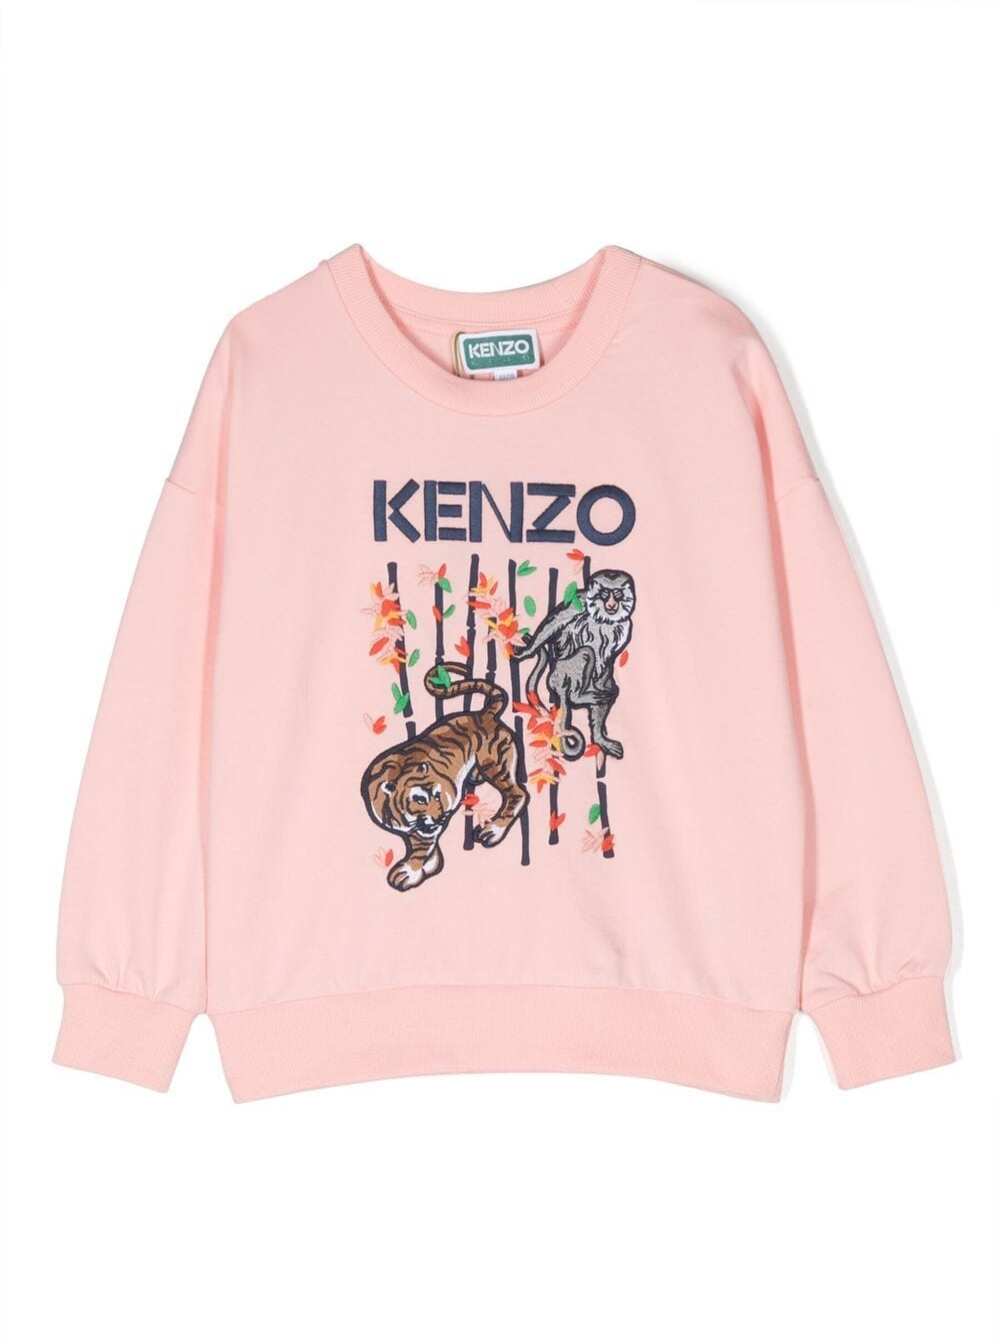 KENZO PINK CREWNECK SWEATSHIRT WITH GRAPHIC PRINT AND LOGO IN COTTON GIRL